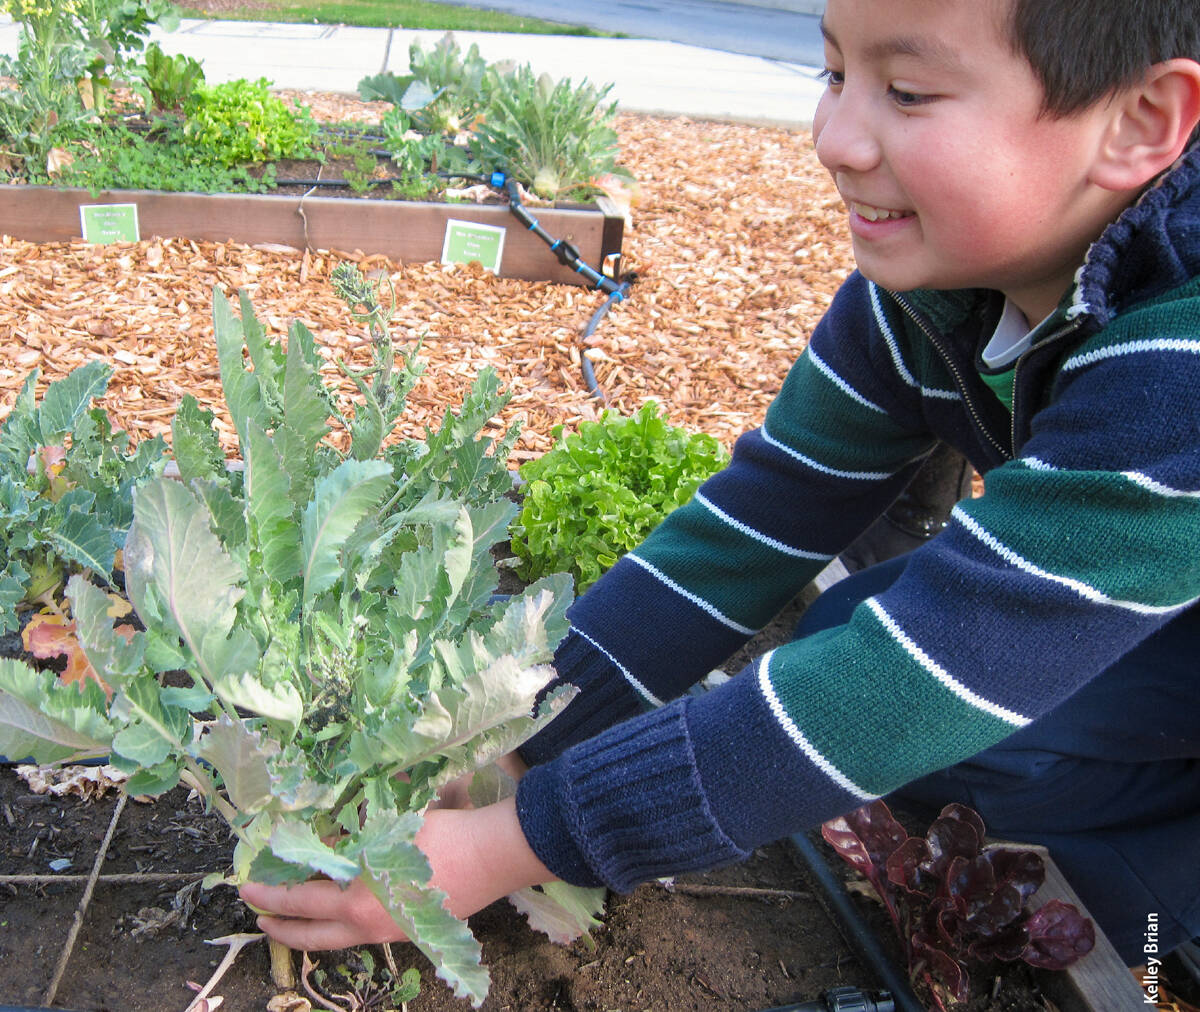 At an elementary school in Sacramento County, a child harvests produce grown as part of the Shaping Healthy Choices project. The project was an example of stakeholder-oriented experimental research.